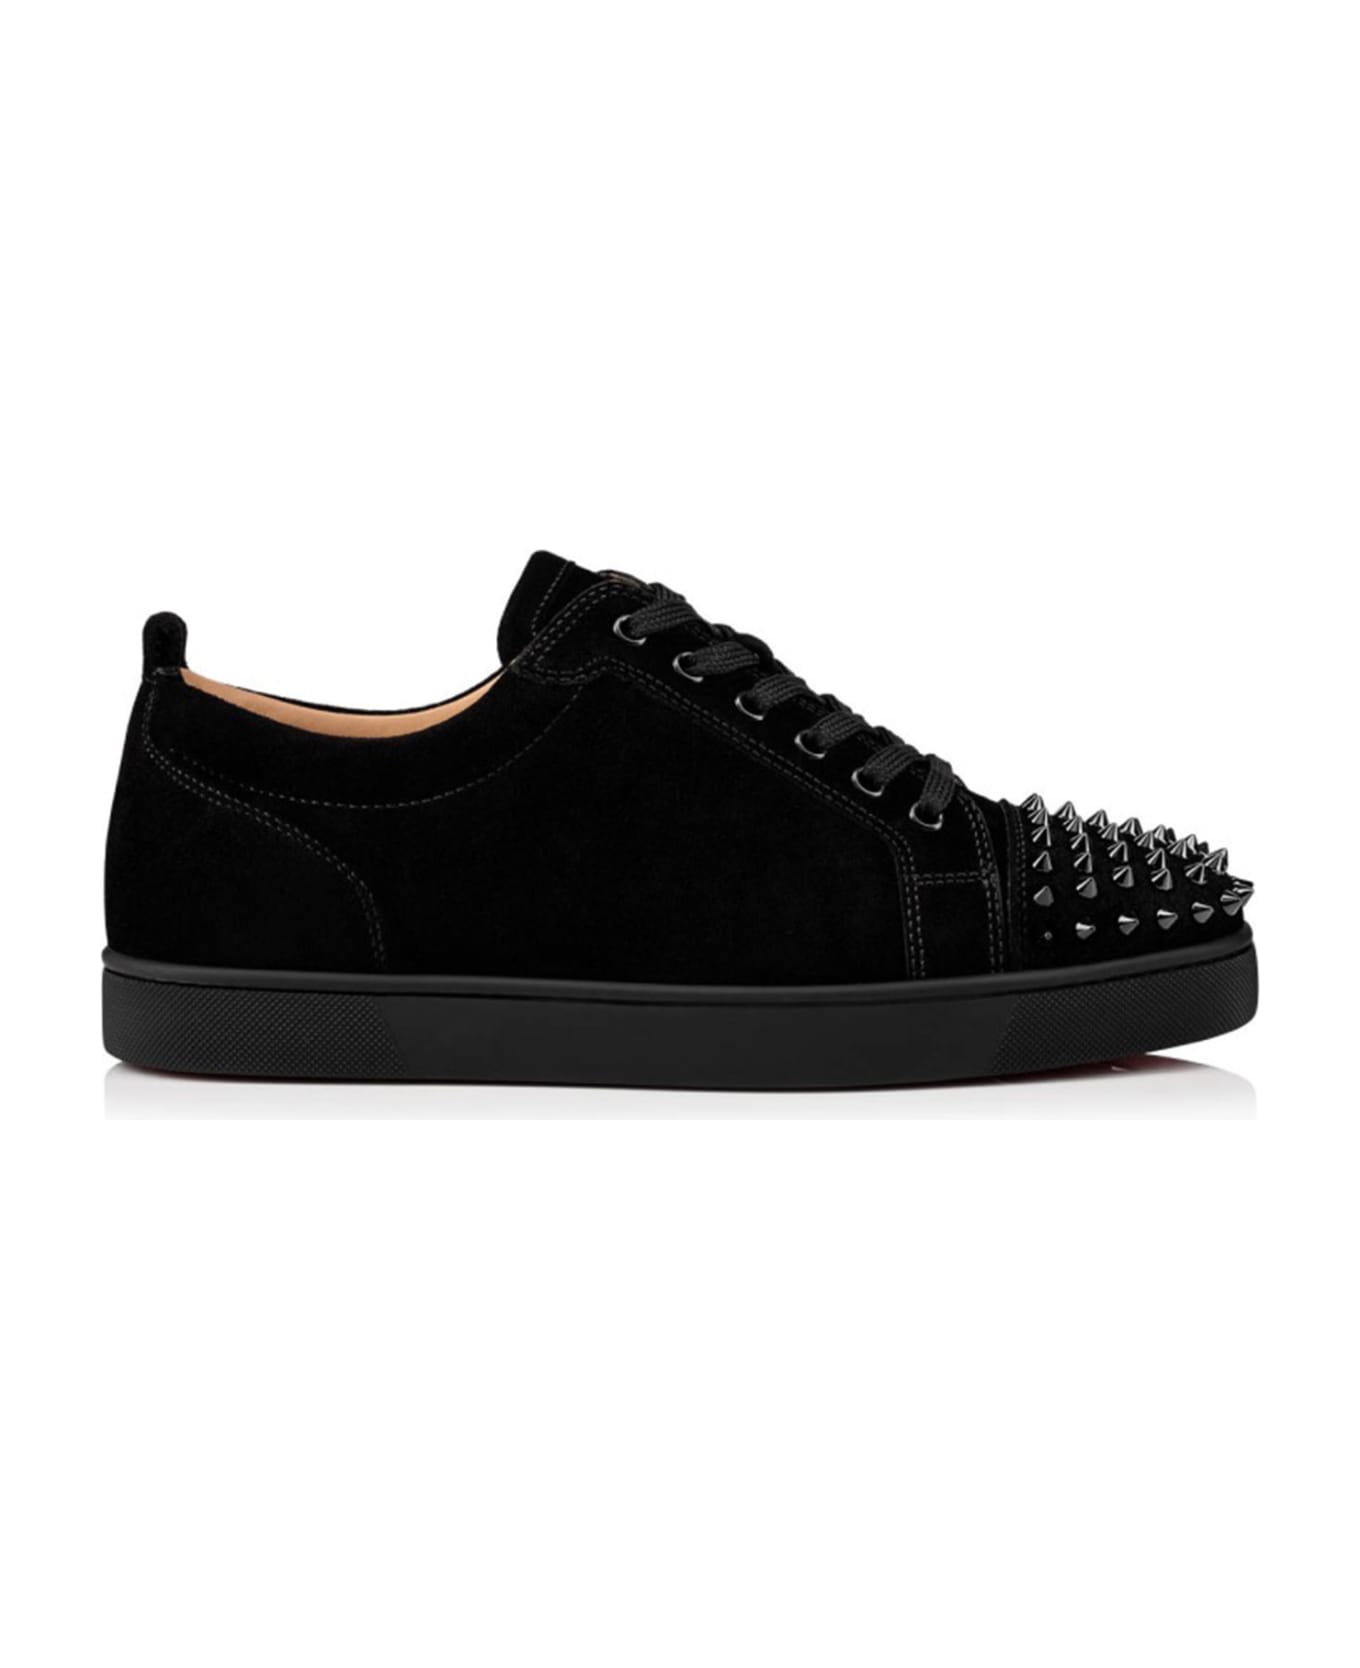 Christian Louboutin Louis Sneakers With Spikes スニーカー